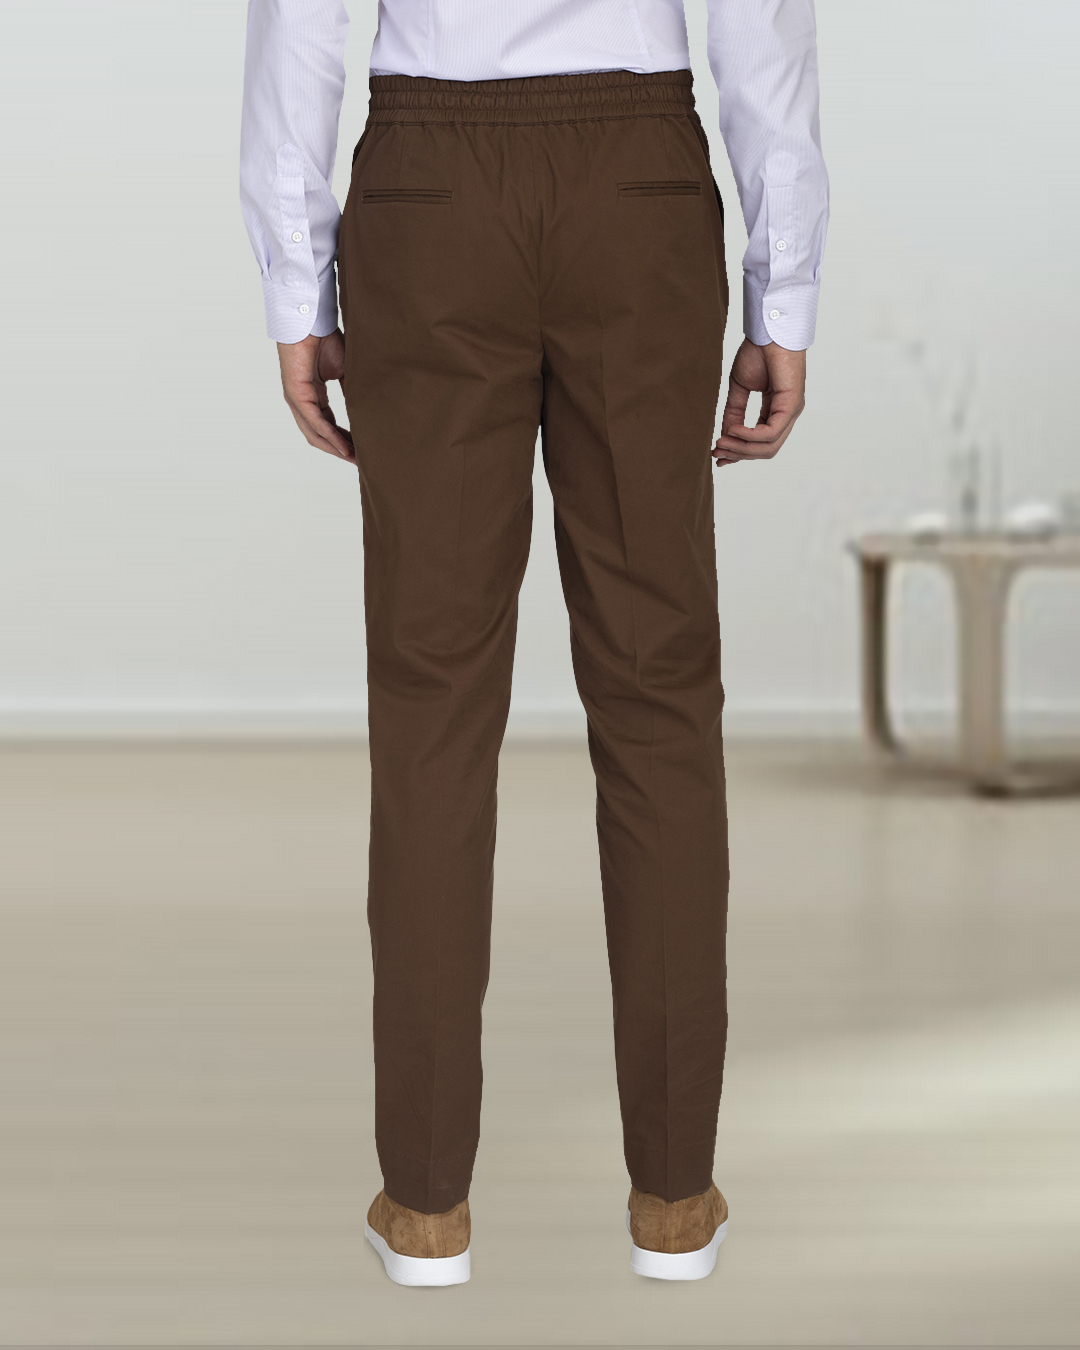 Front close-up view of model wearing custom Genoa drawstring pants for men by Luxire in coffee brown